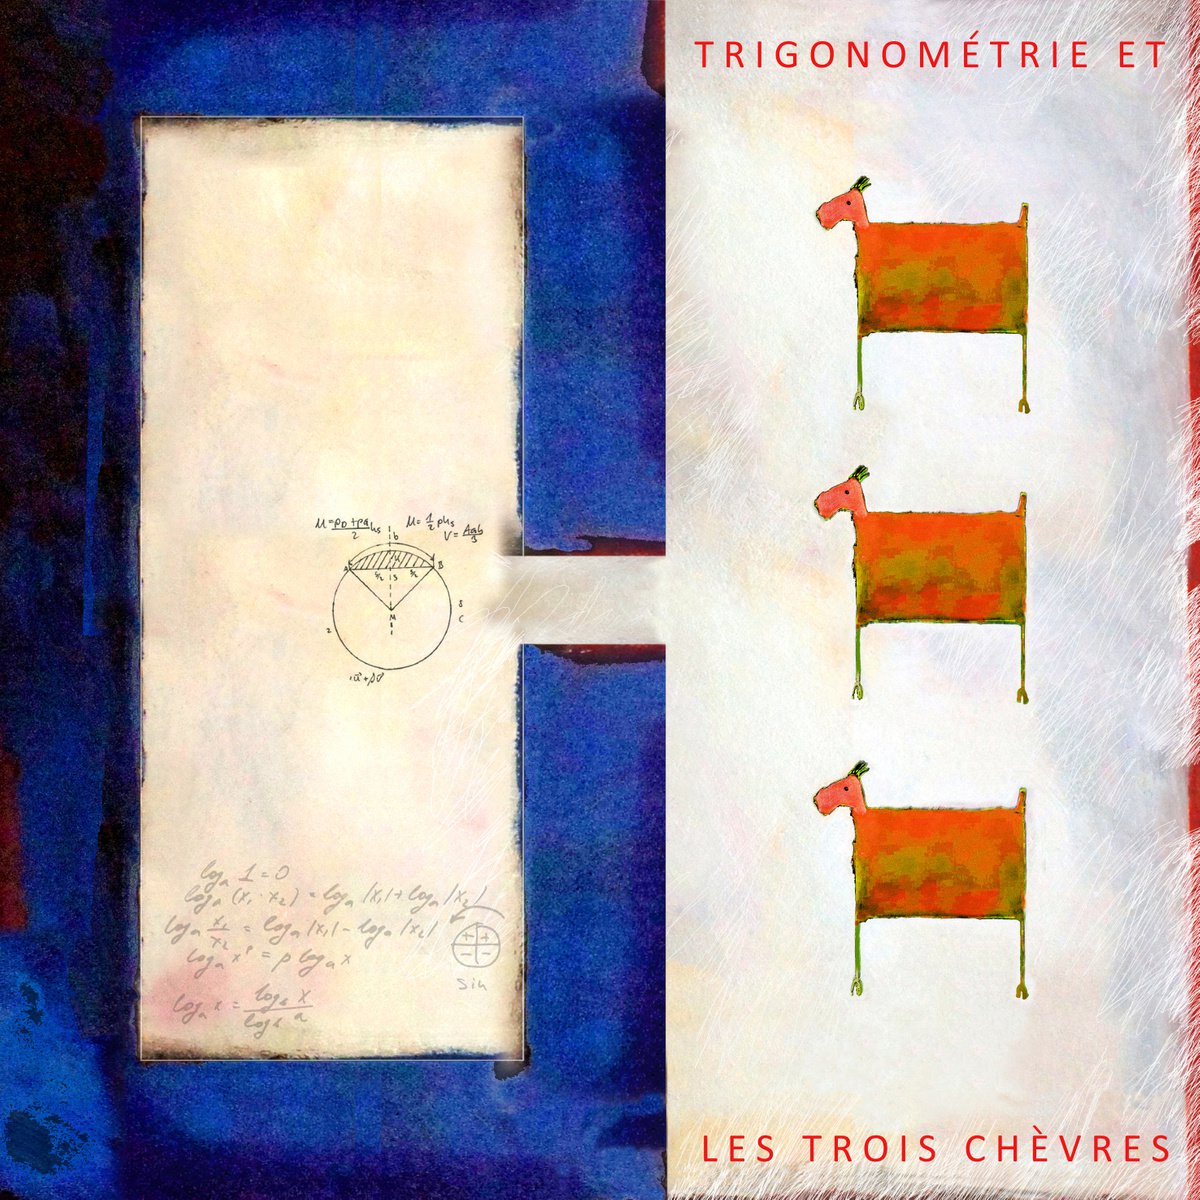 A Congregation Of Relationships#5  Les Trois Chevres. (Movement And Enclosure). by Richard Pike